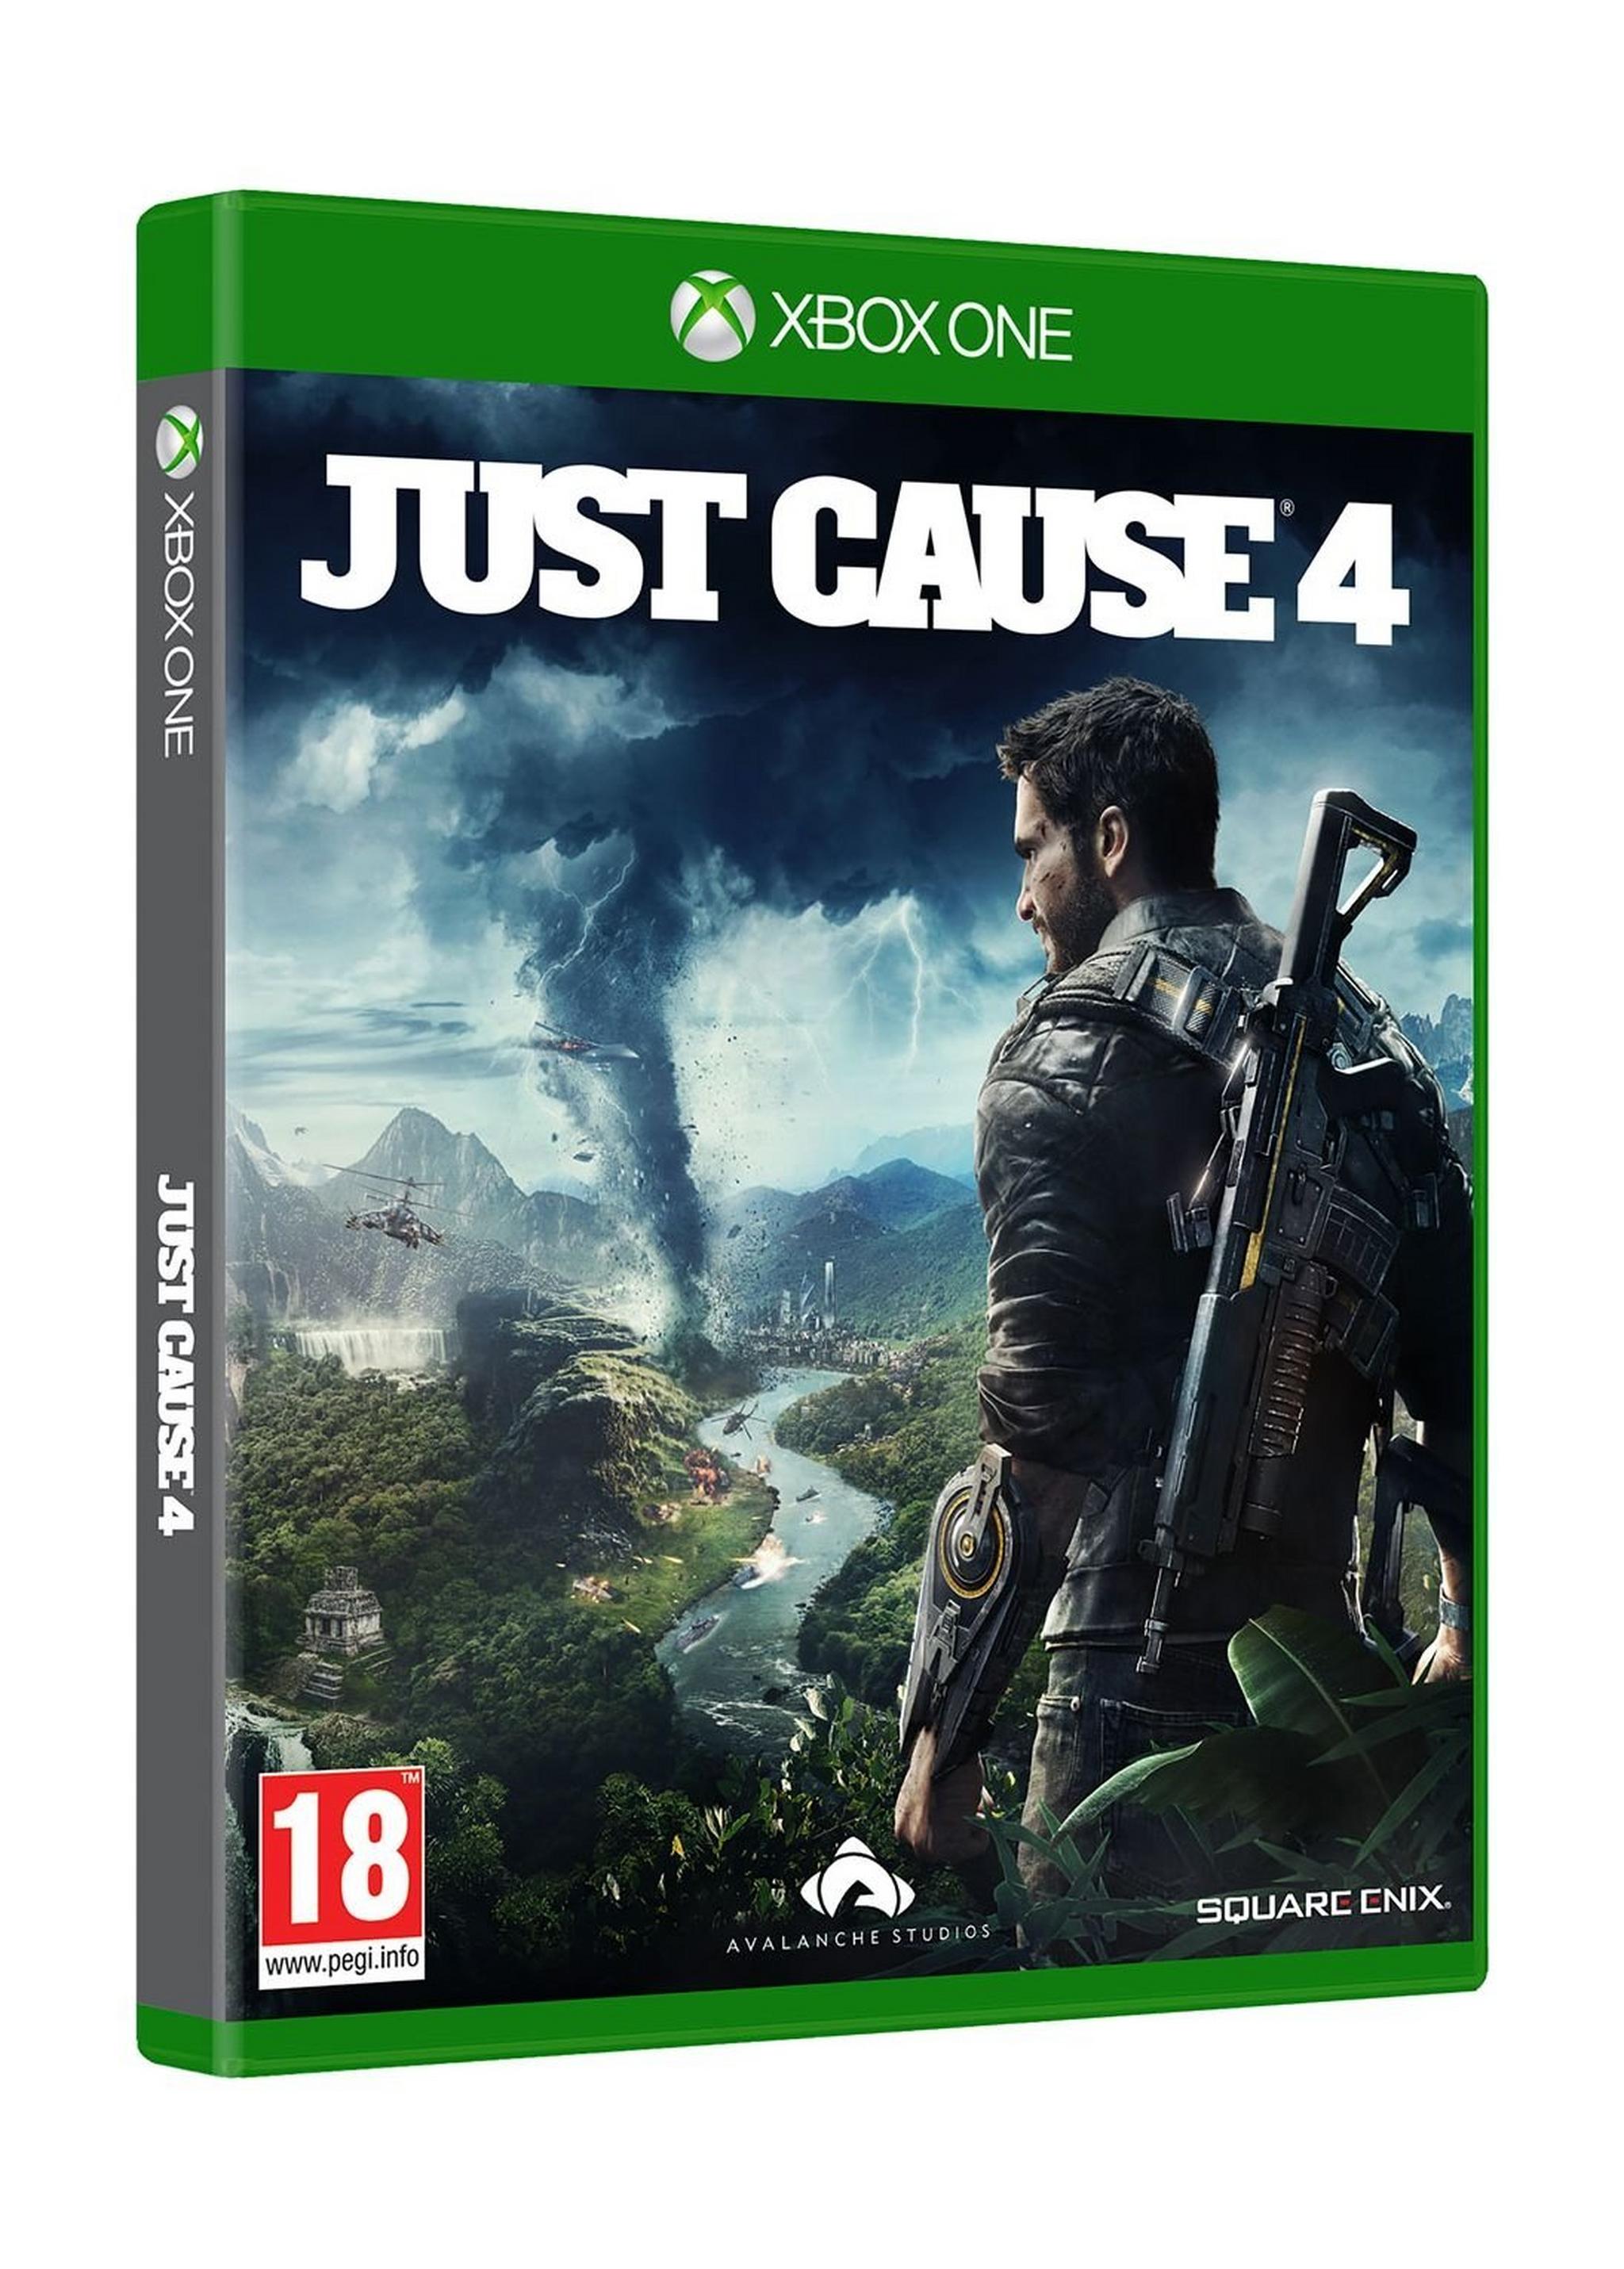 Just Cause 4 - XBOX ONE Game